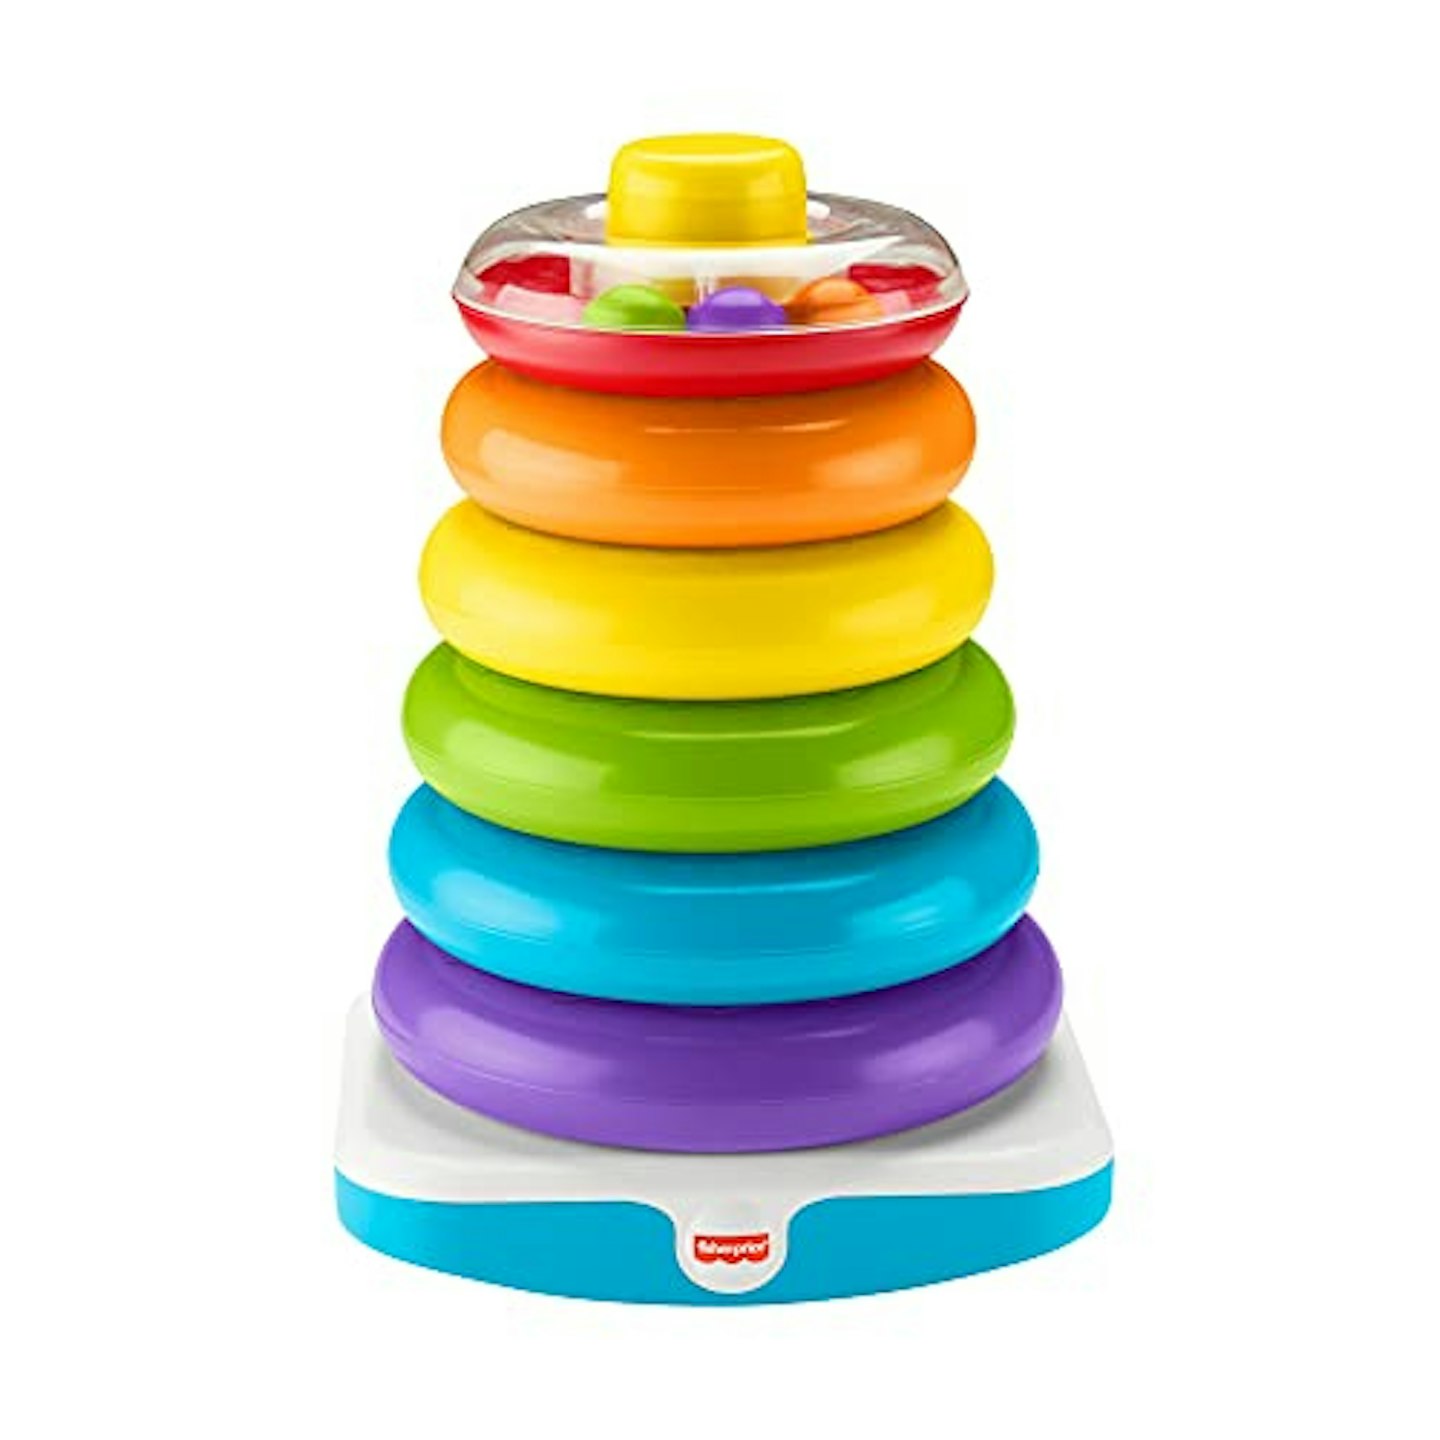 Fisher-Price Giant Rock-a-Stack